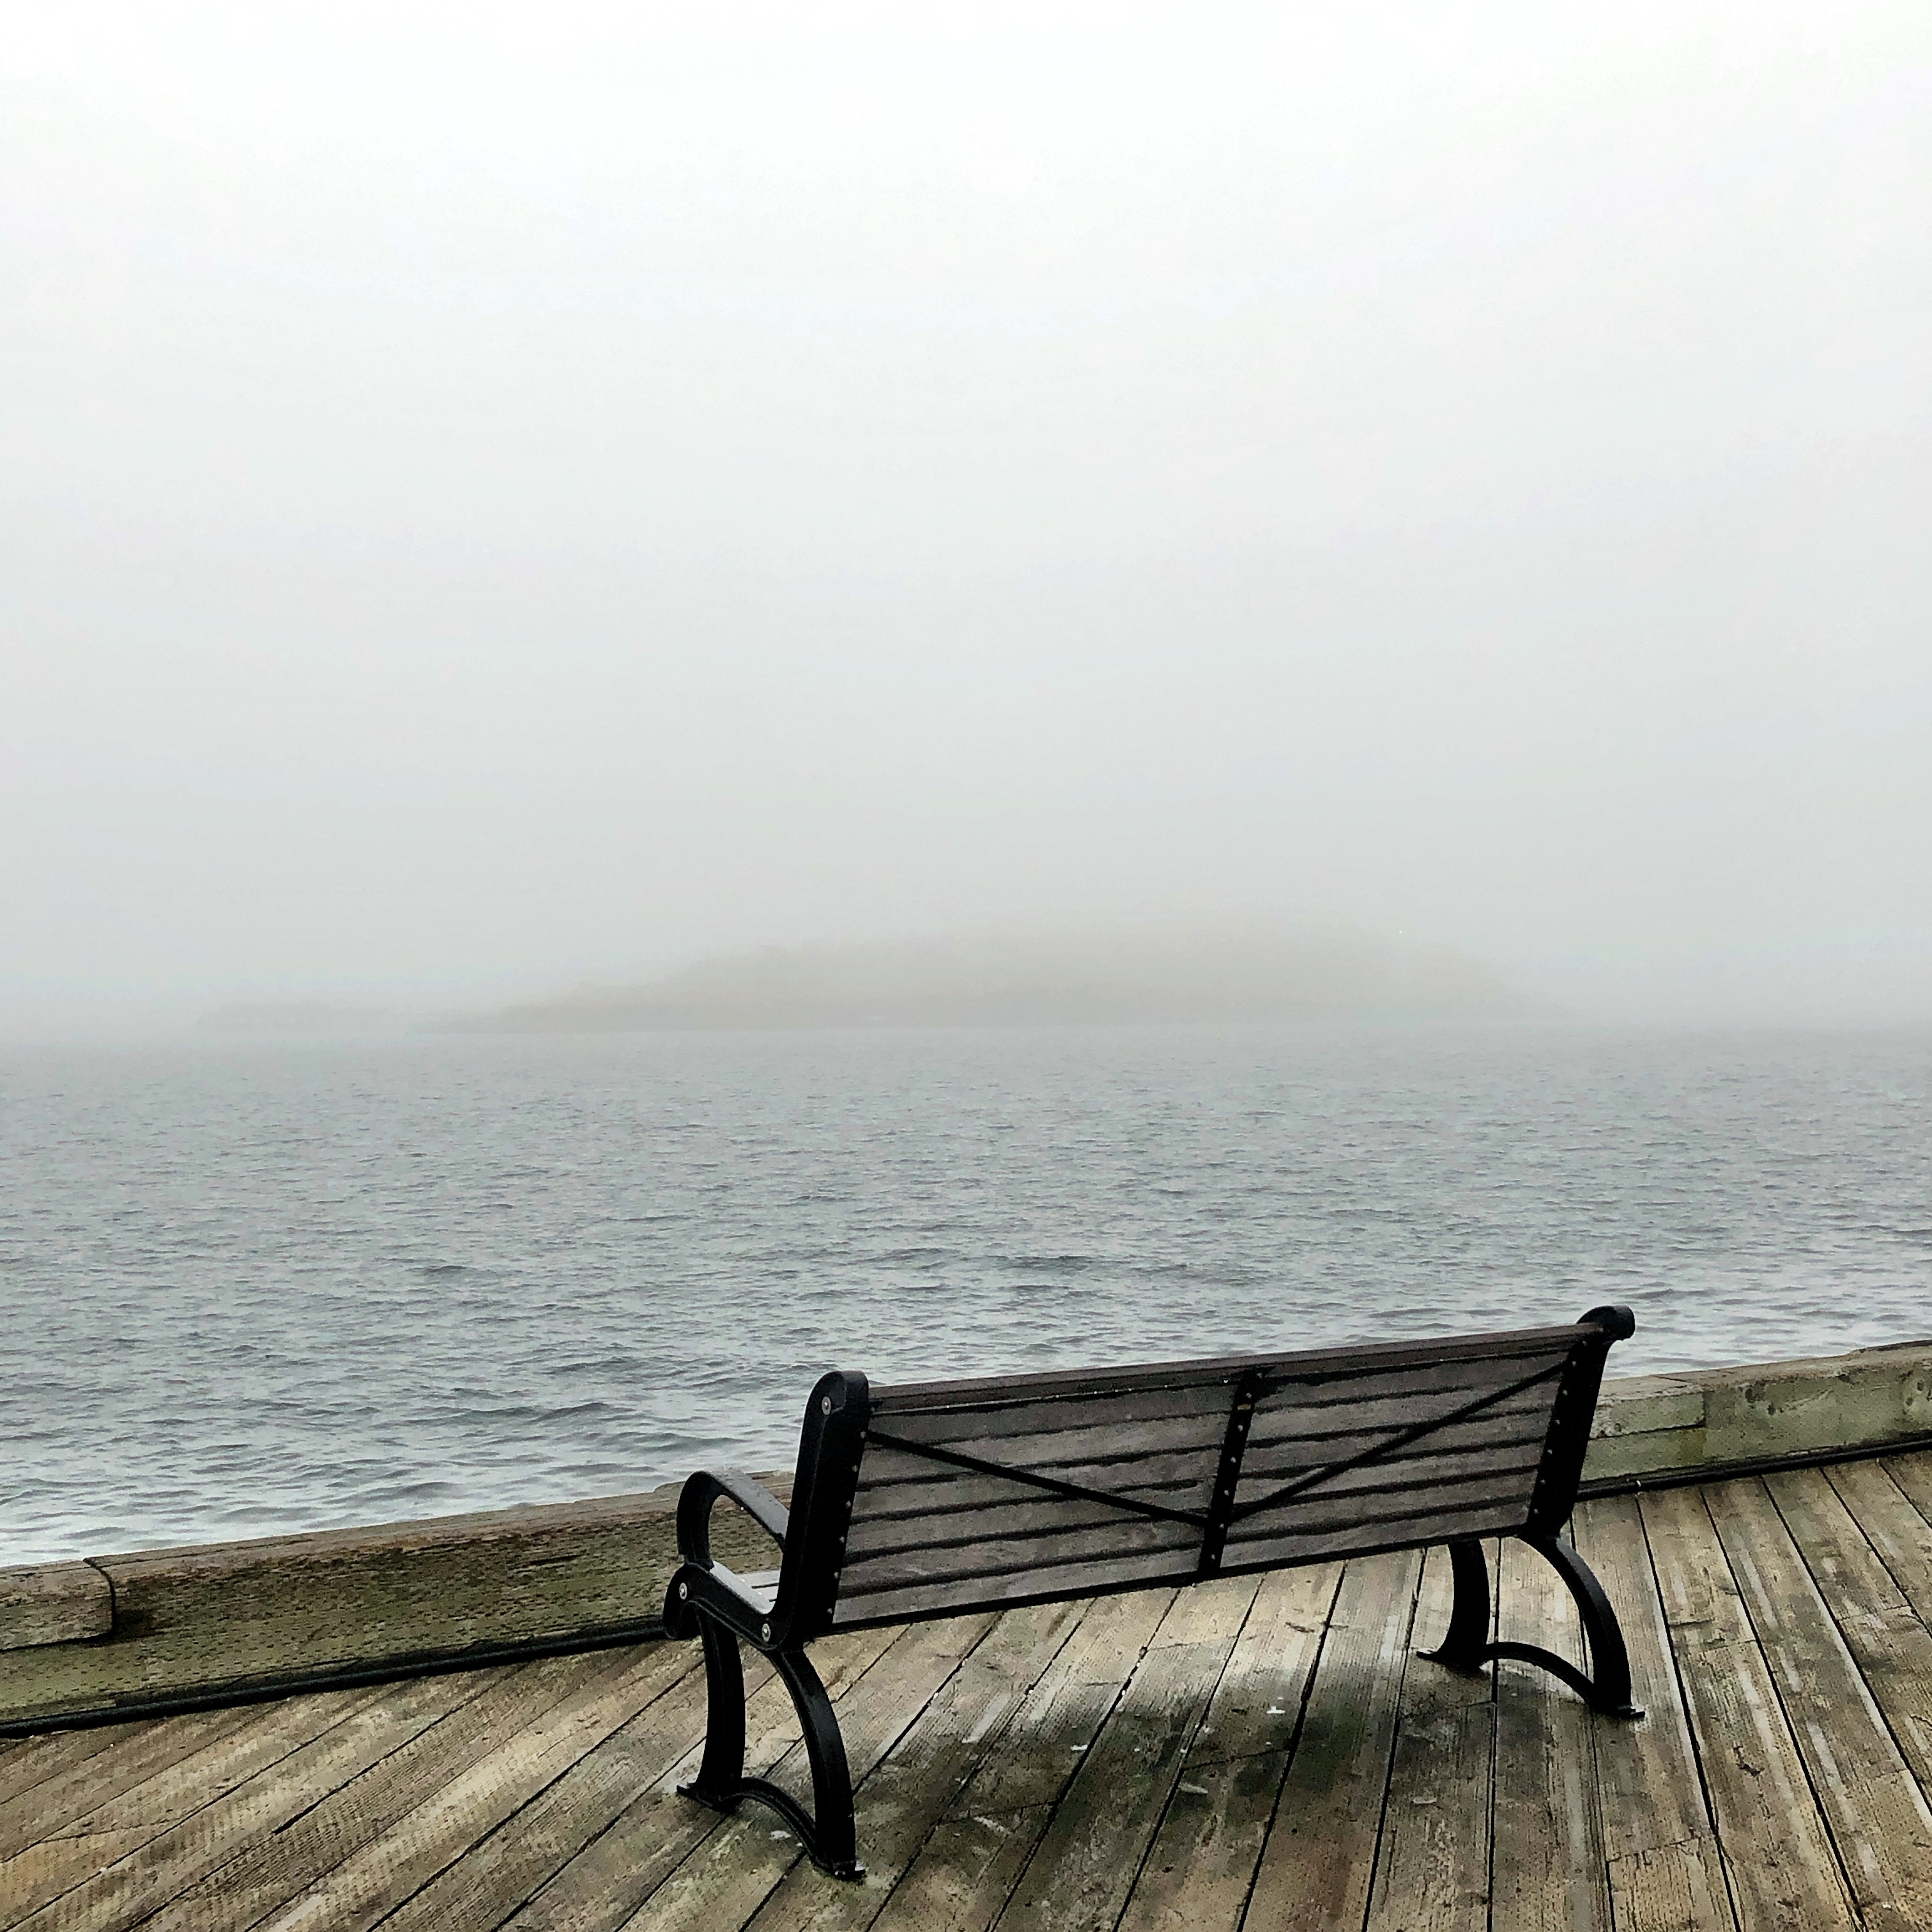 March 12, 2022 - The Fog - Georges Island